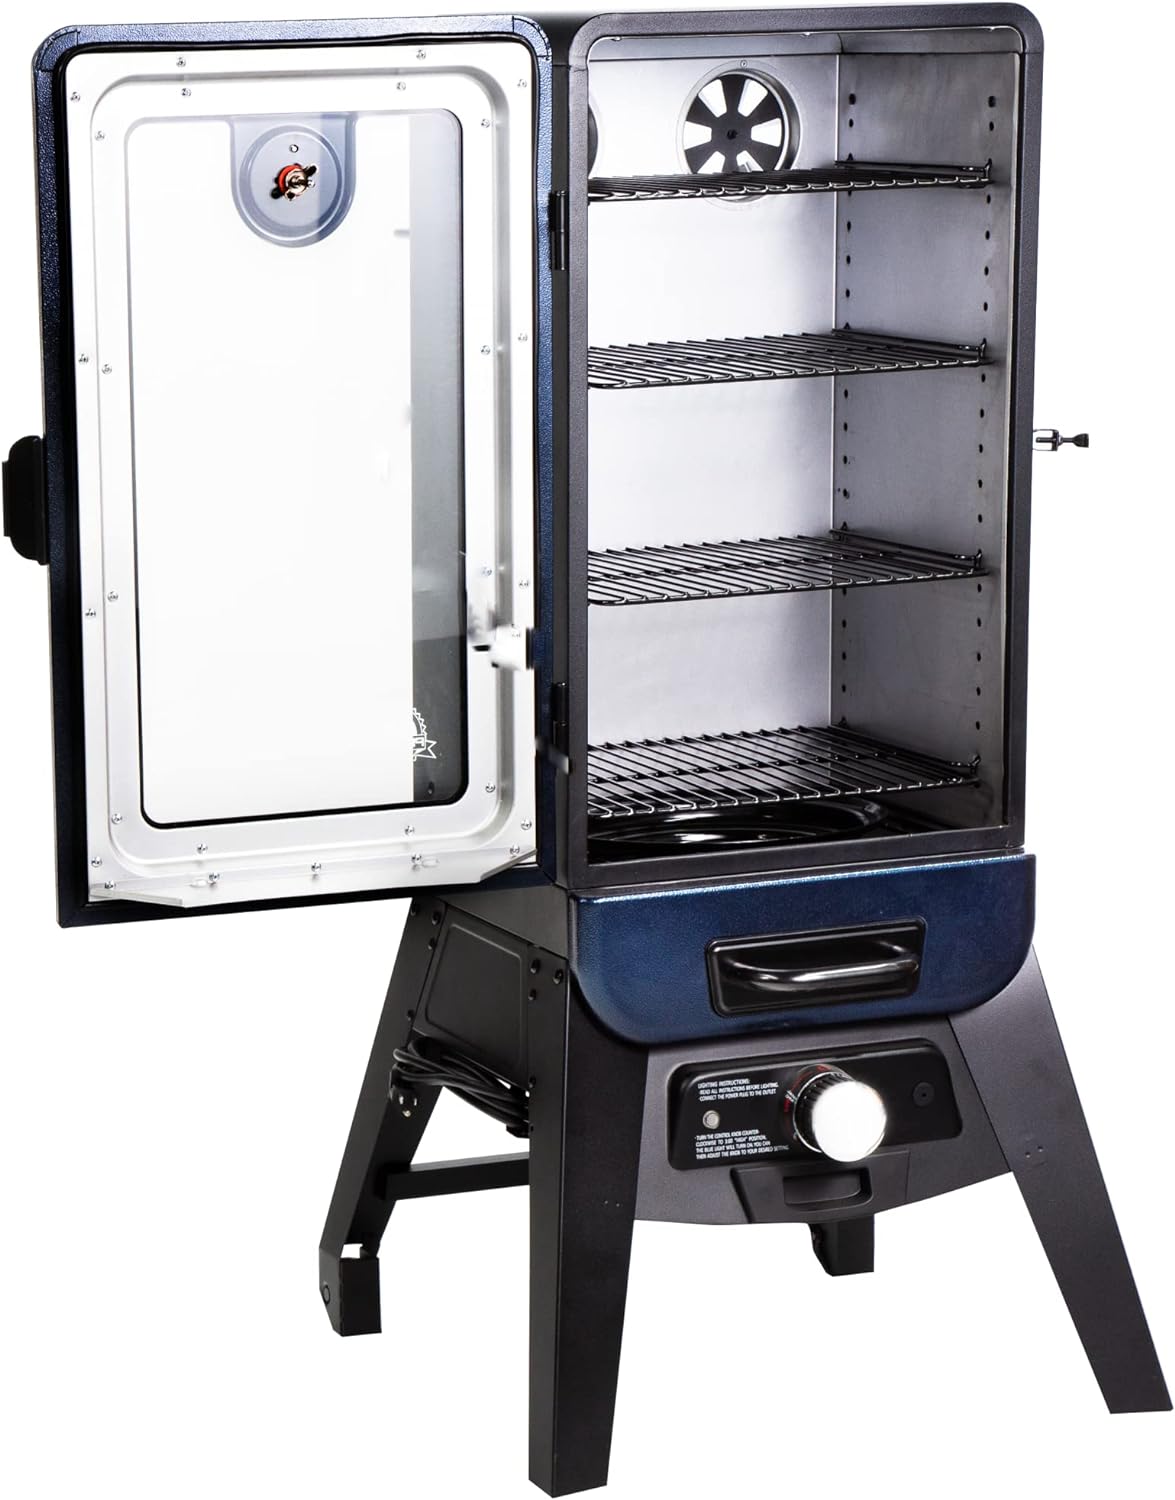 Pit Boss Grills PBV3A1 Electric Smoker, Blue Hammertone, 684 sq inches